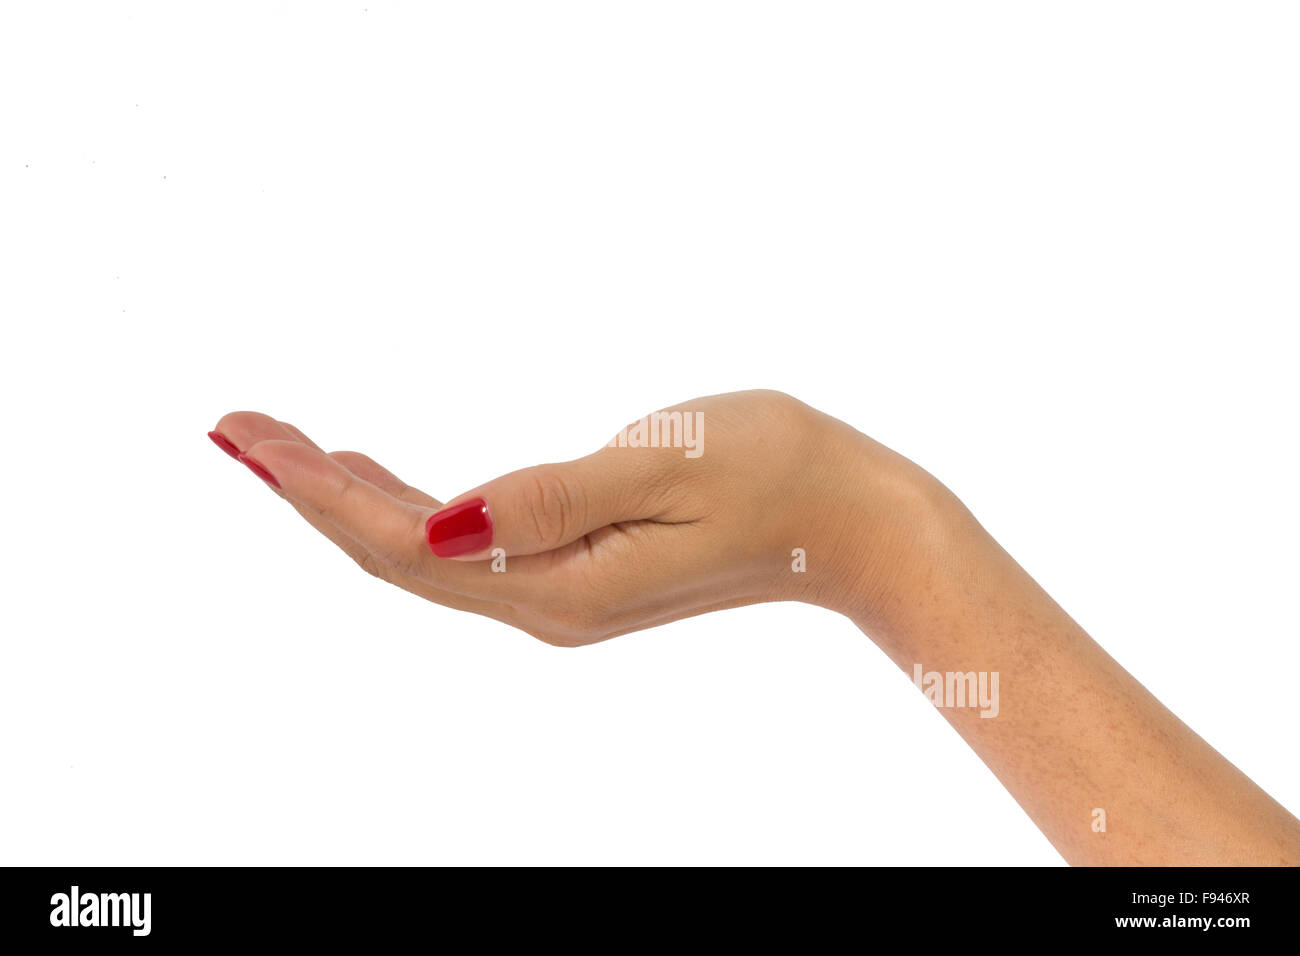 Woman's hand with red fingernails holding nothing on white background Stock Photo